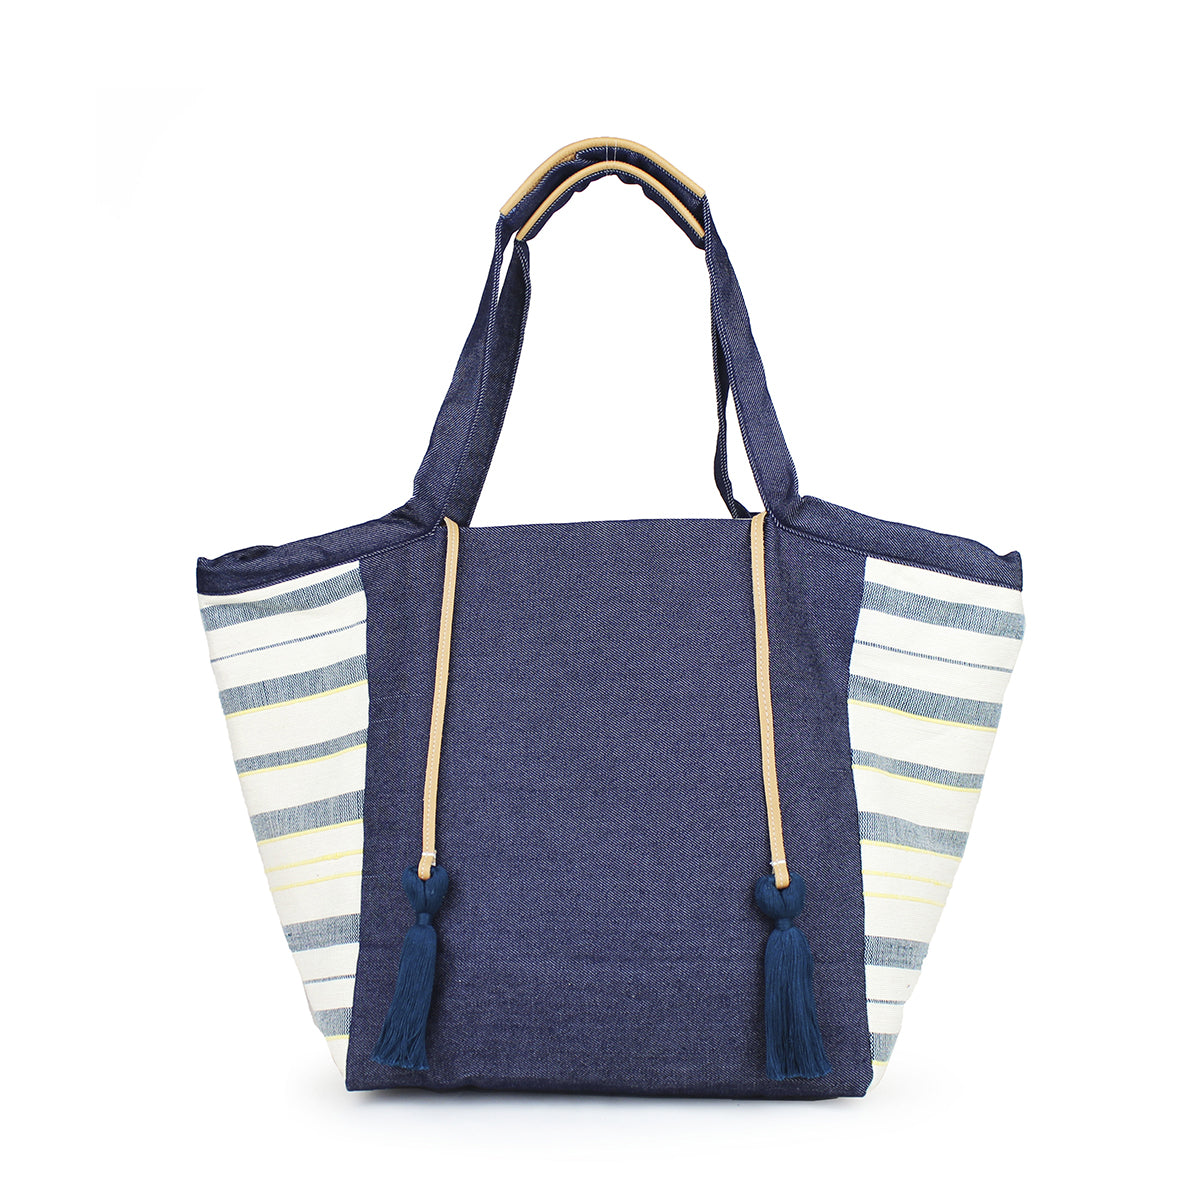 Artisan Rosa Handwoven Tote in Denim Ocean. The bag has a dark wash denim fabric with leather detailing on the handles. It has a light blue, yellow, and white horizontal striped fabric on the sides. It has two leather cords with dark blue tassels attached.